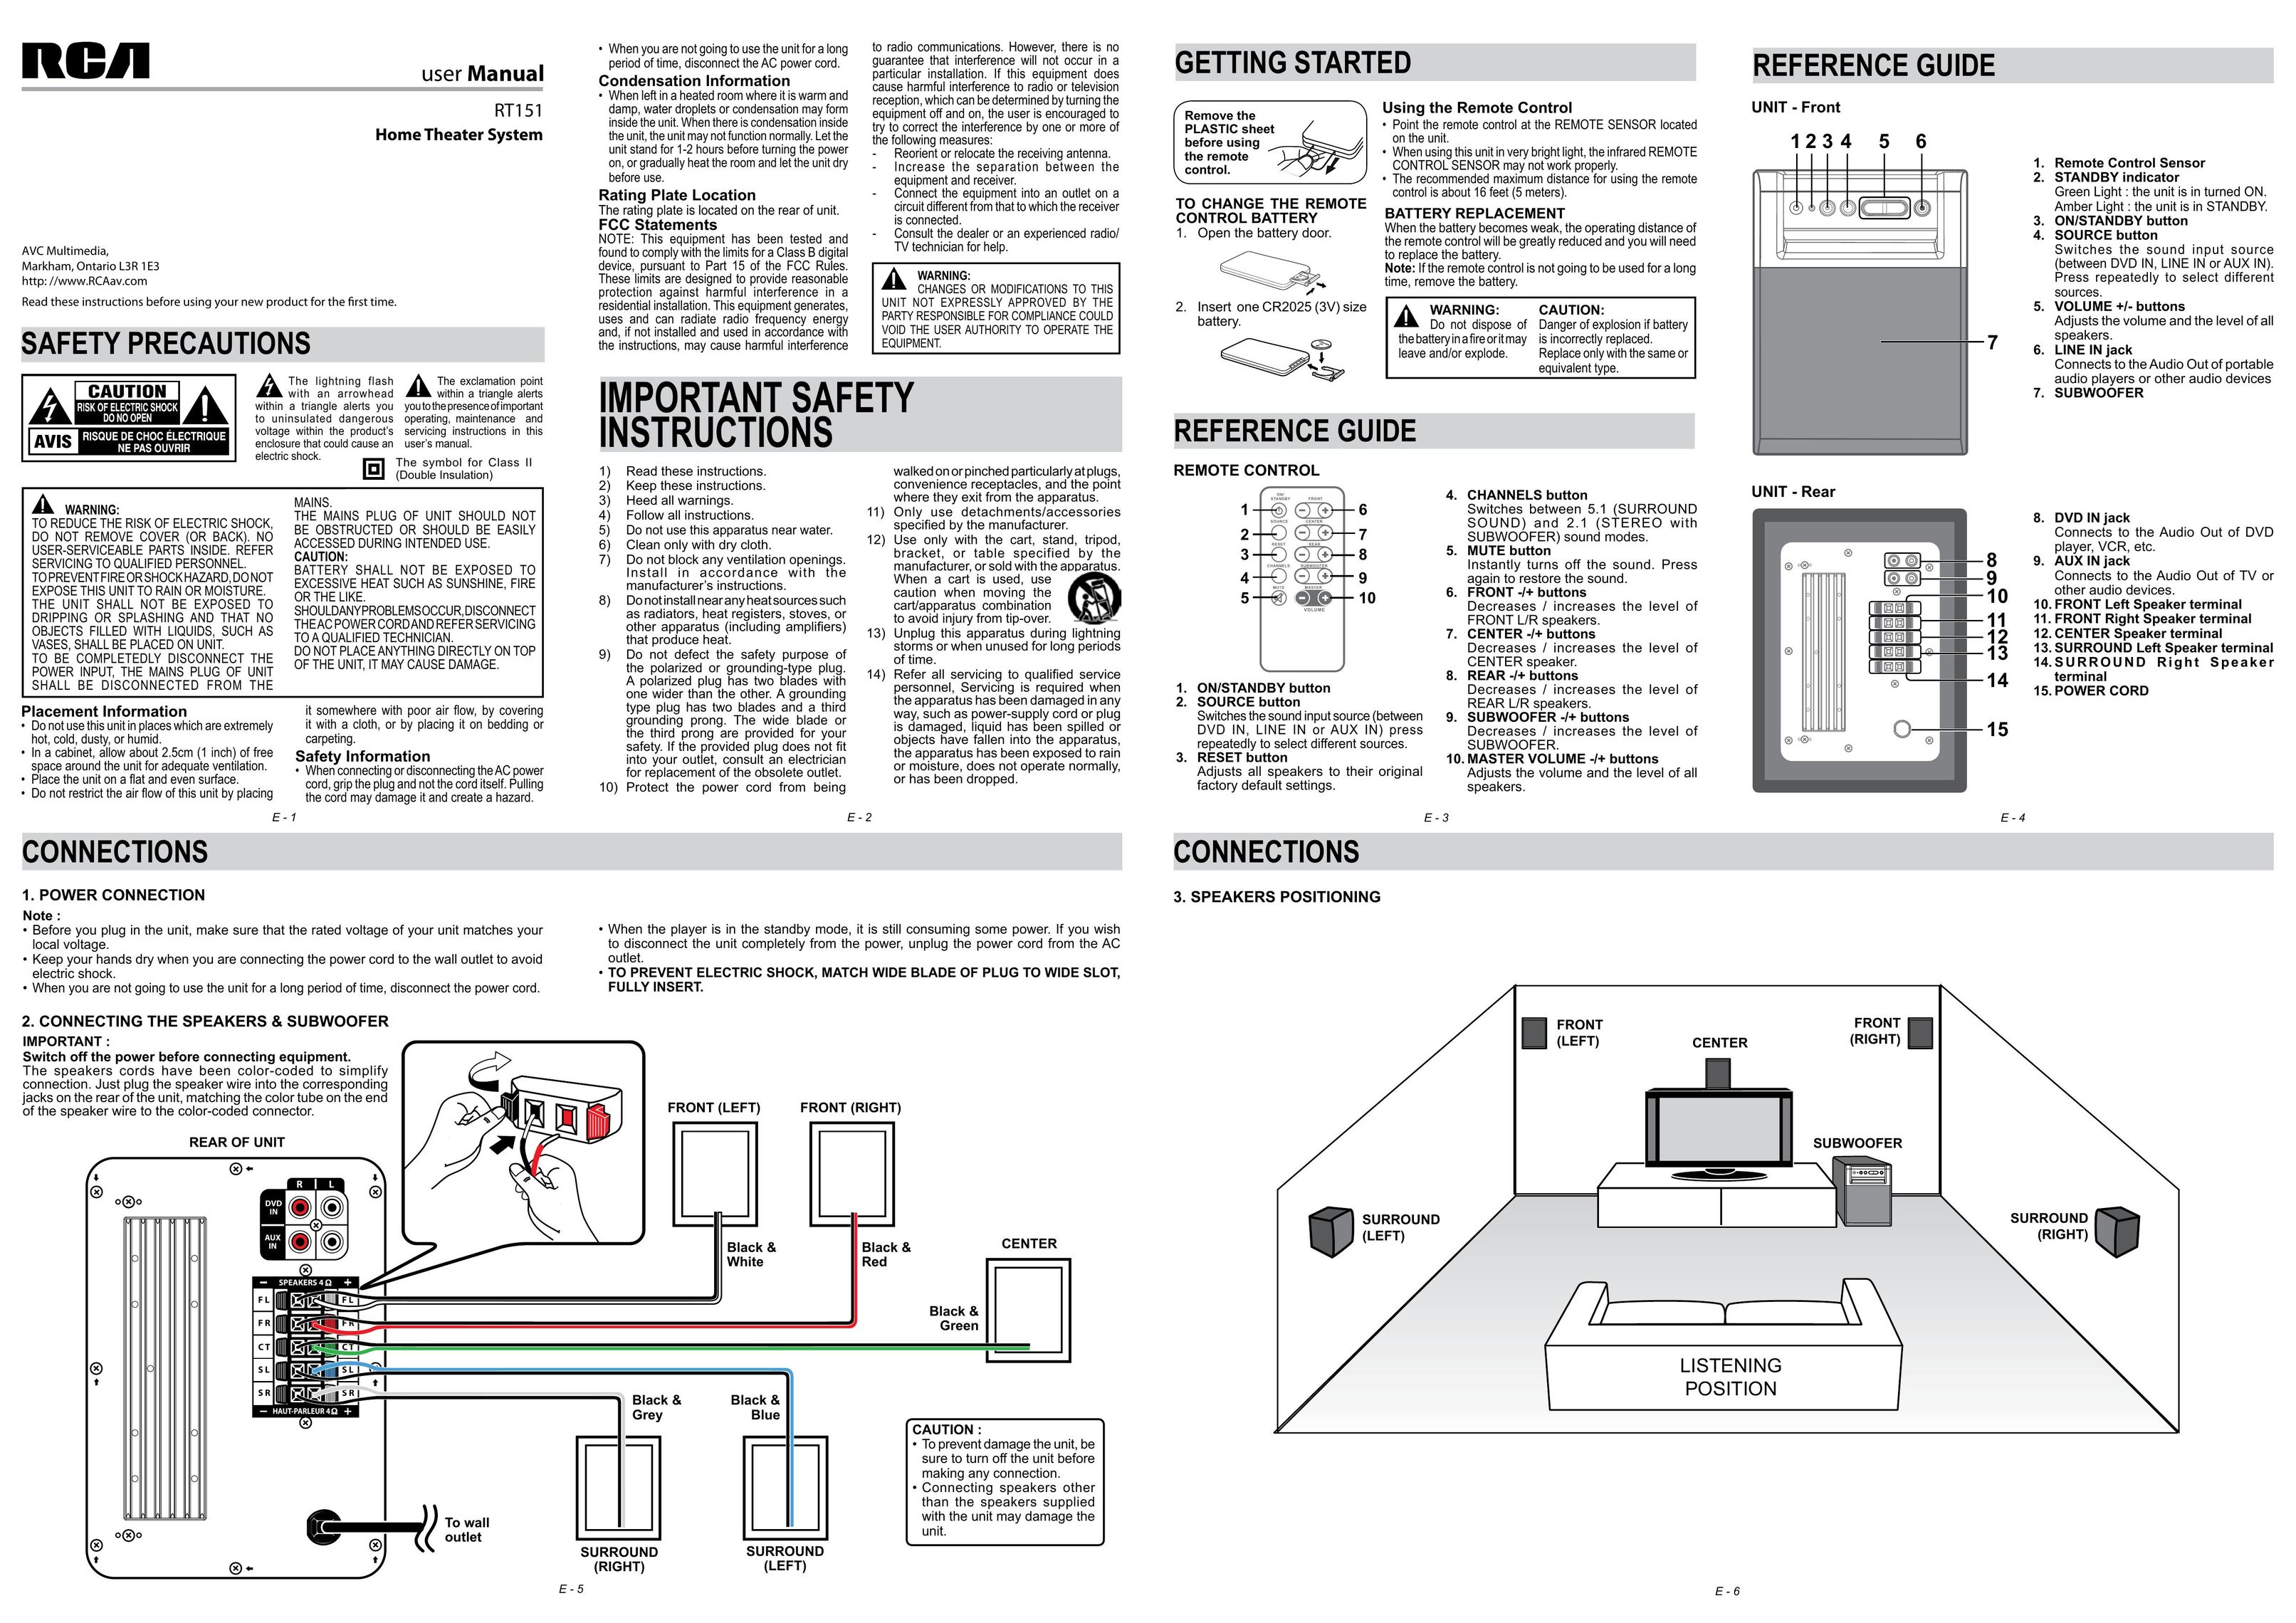 RCA RT151 Home Theater System User Manual